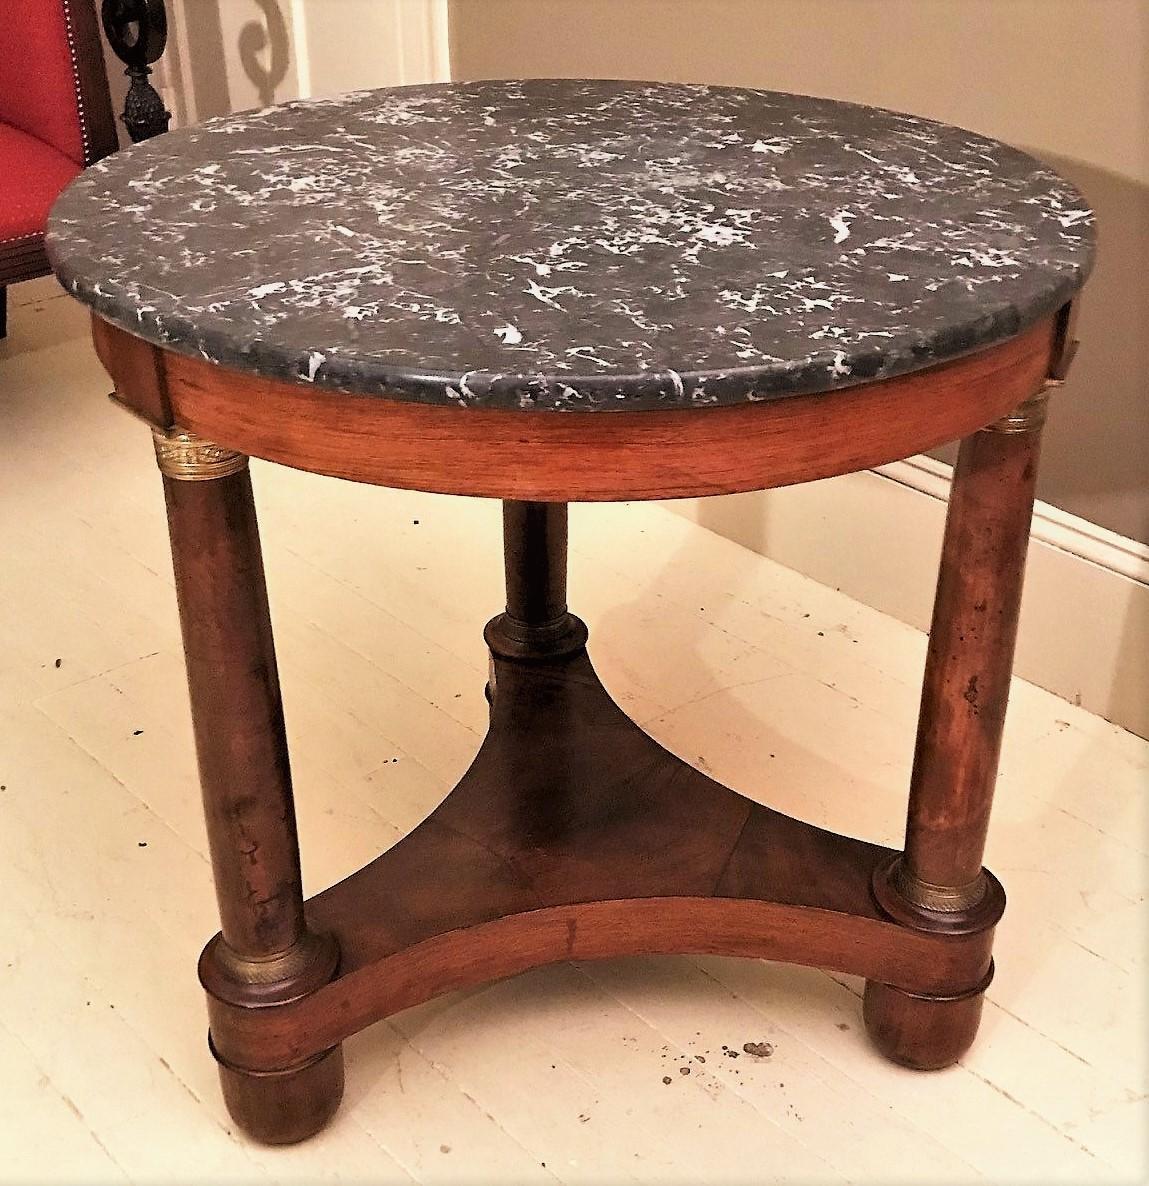 This table is an excellent example of Napoleonic furniture design, and is also very useful in today's home. Perfect as a center table in a foyer or as a side table in the living room. The small size and round shape make it especially good for small